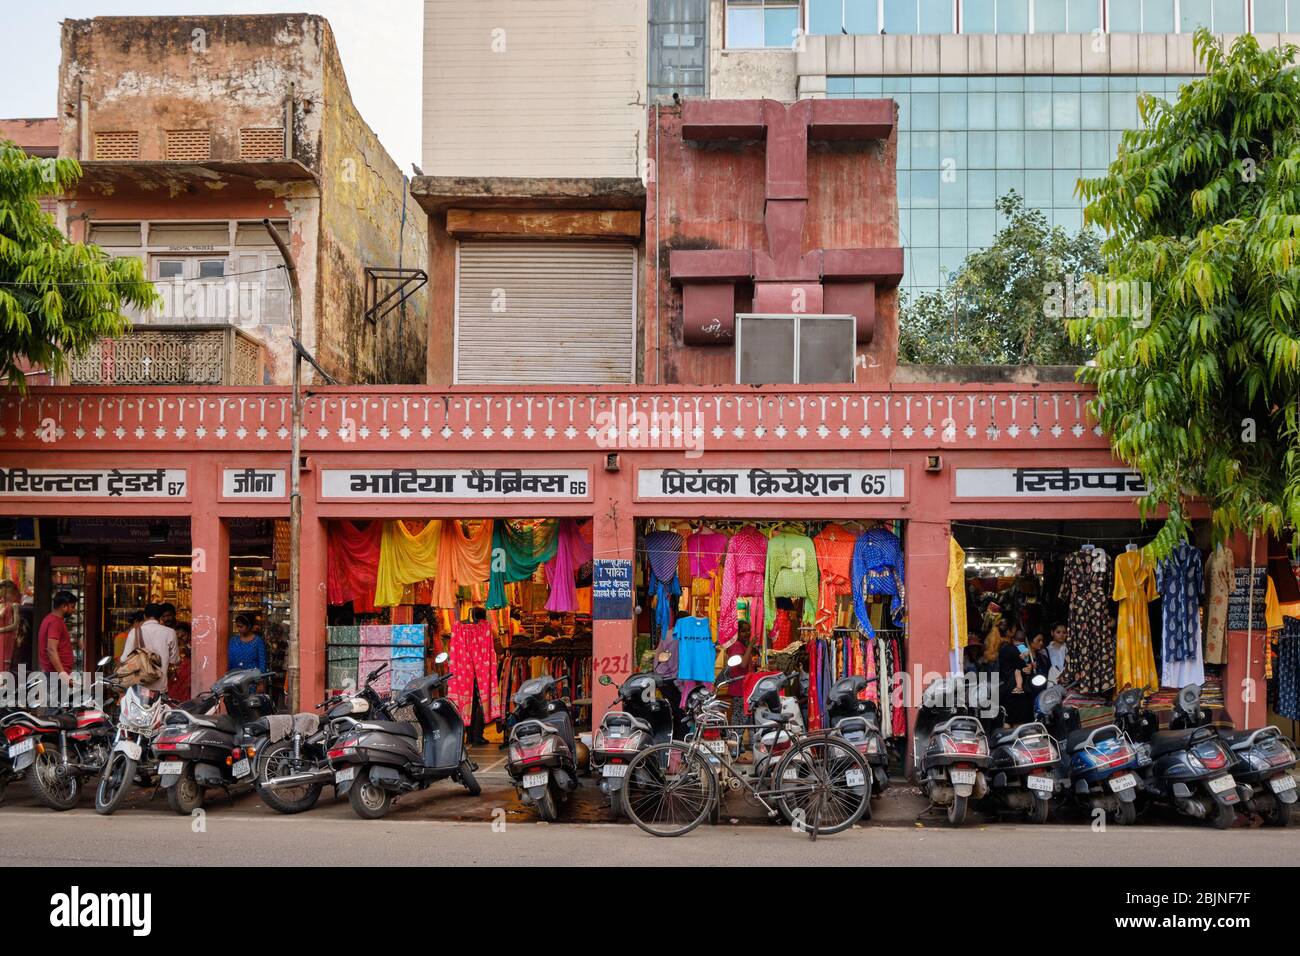 Jaipur, Rajasthan / India - September 28, 2019: Bapu Bazar in Jaipur Pink city, India, one of the most famous markets of the city for buying tradition Stock Photo